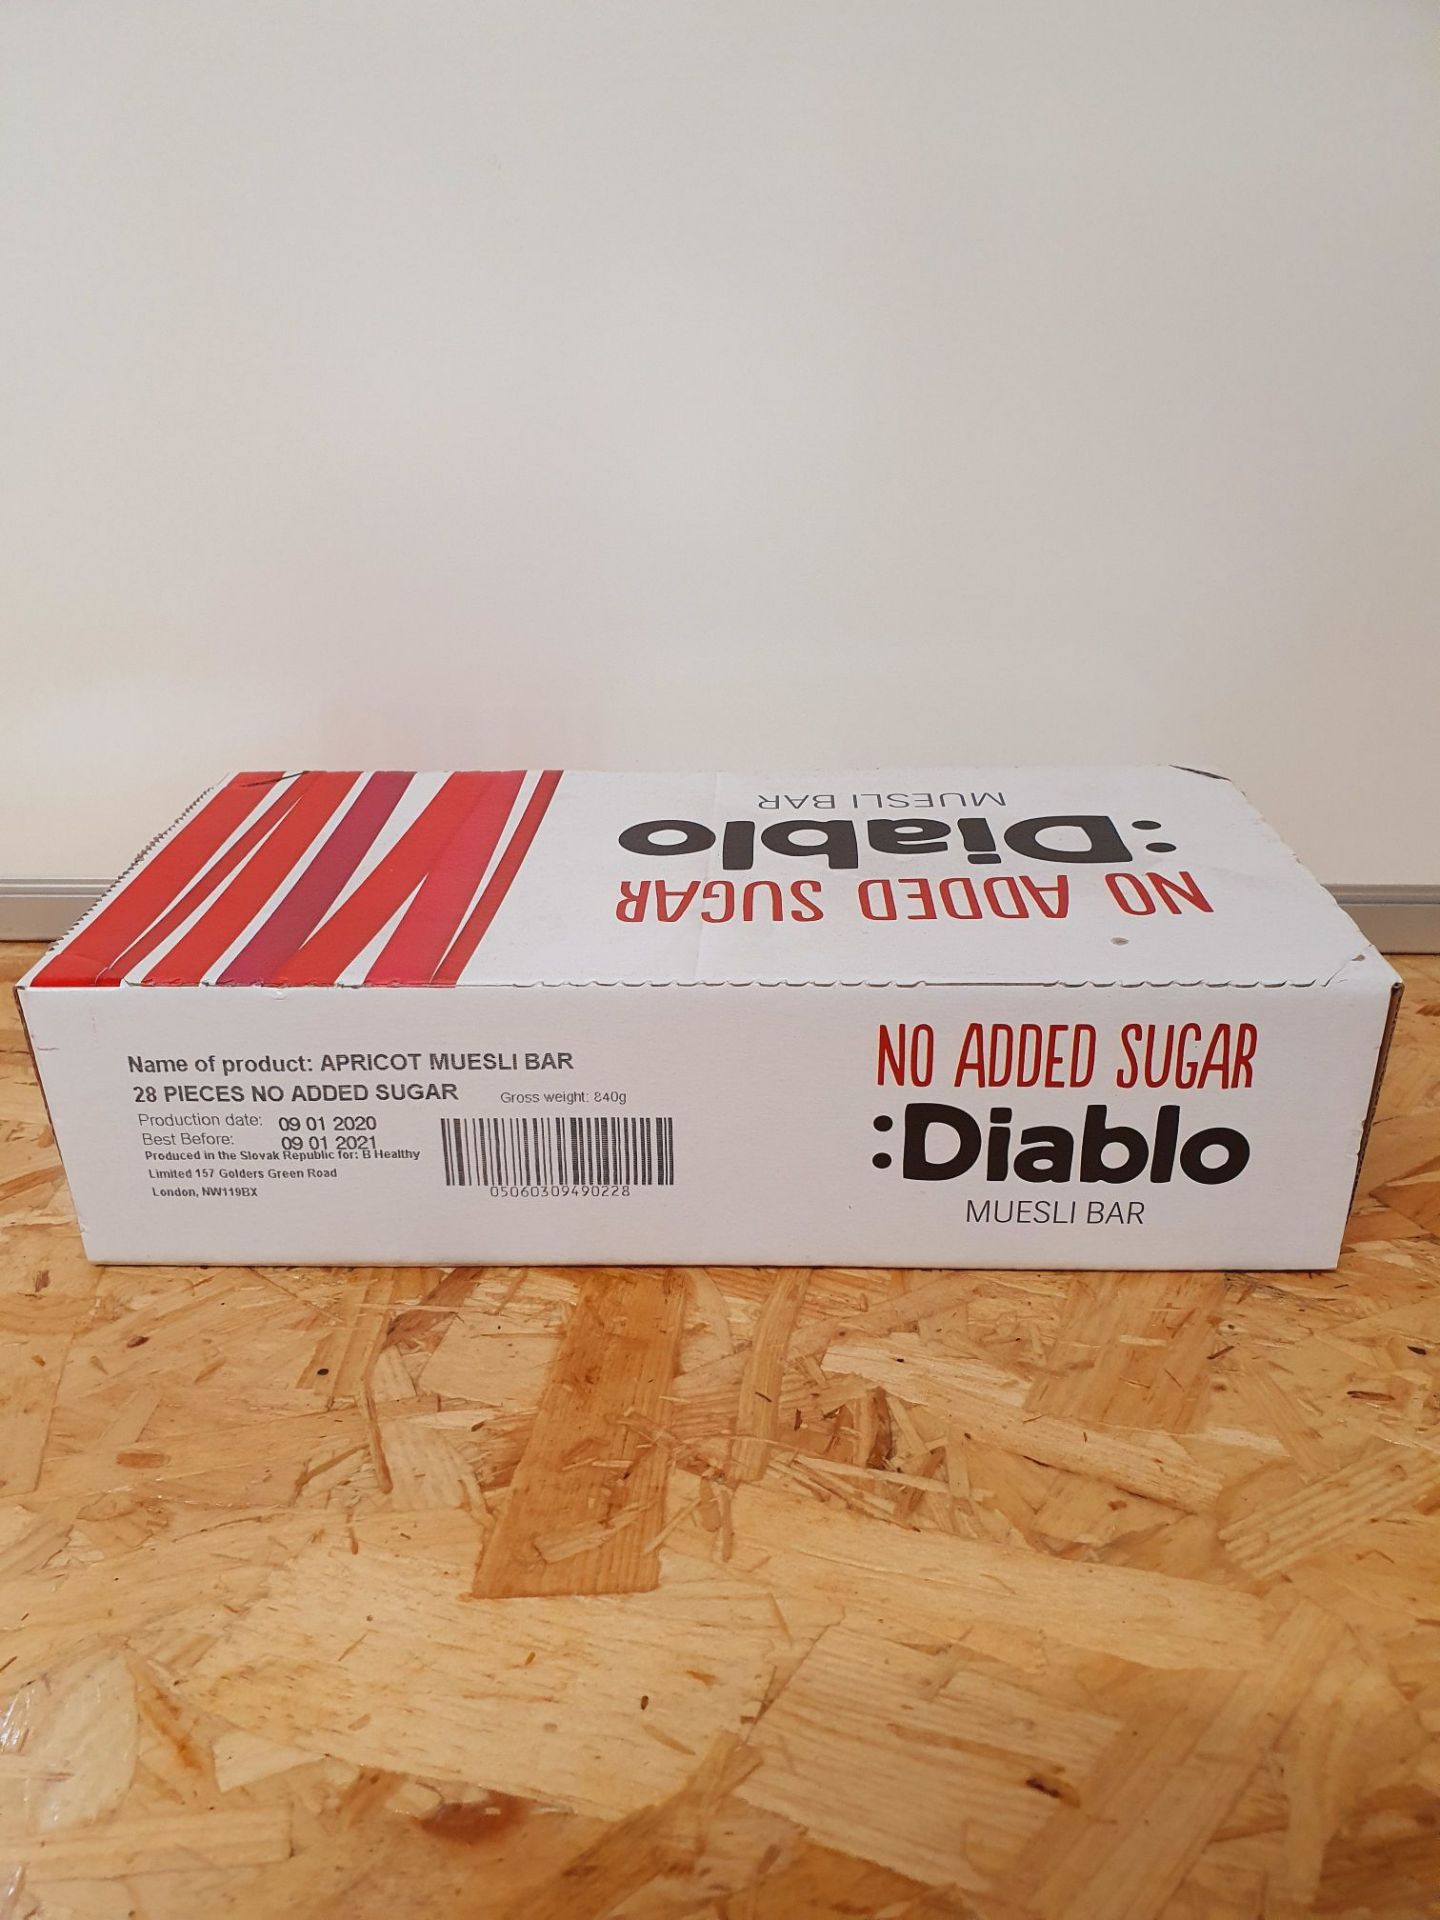 ONE LOT TO CONTAIN ONE BOX OF DIABLO MUSELI BARS - APRICOT. 28 BARS IN BOX. BEST BEFORE 09/01/2021